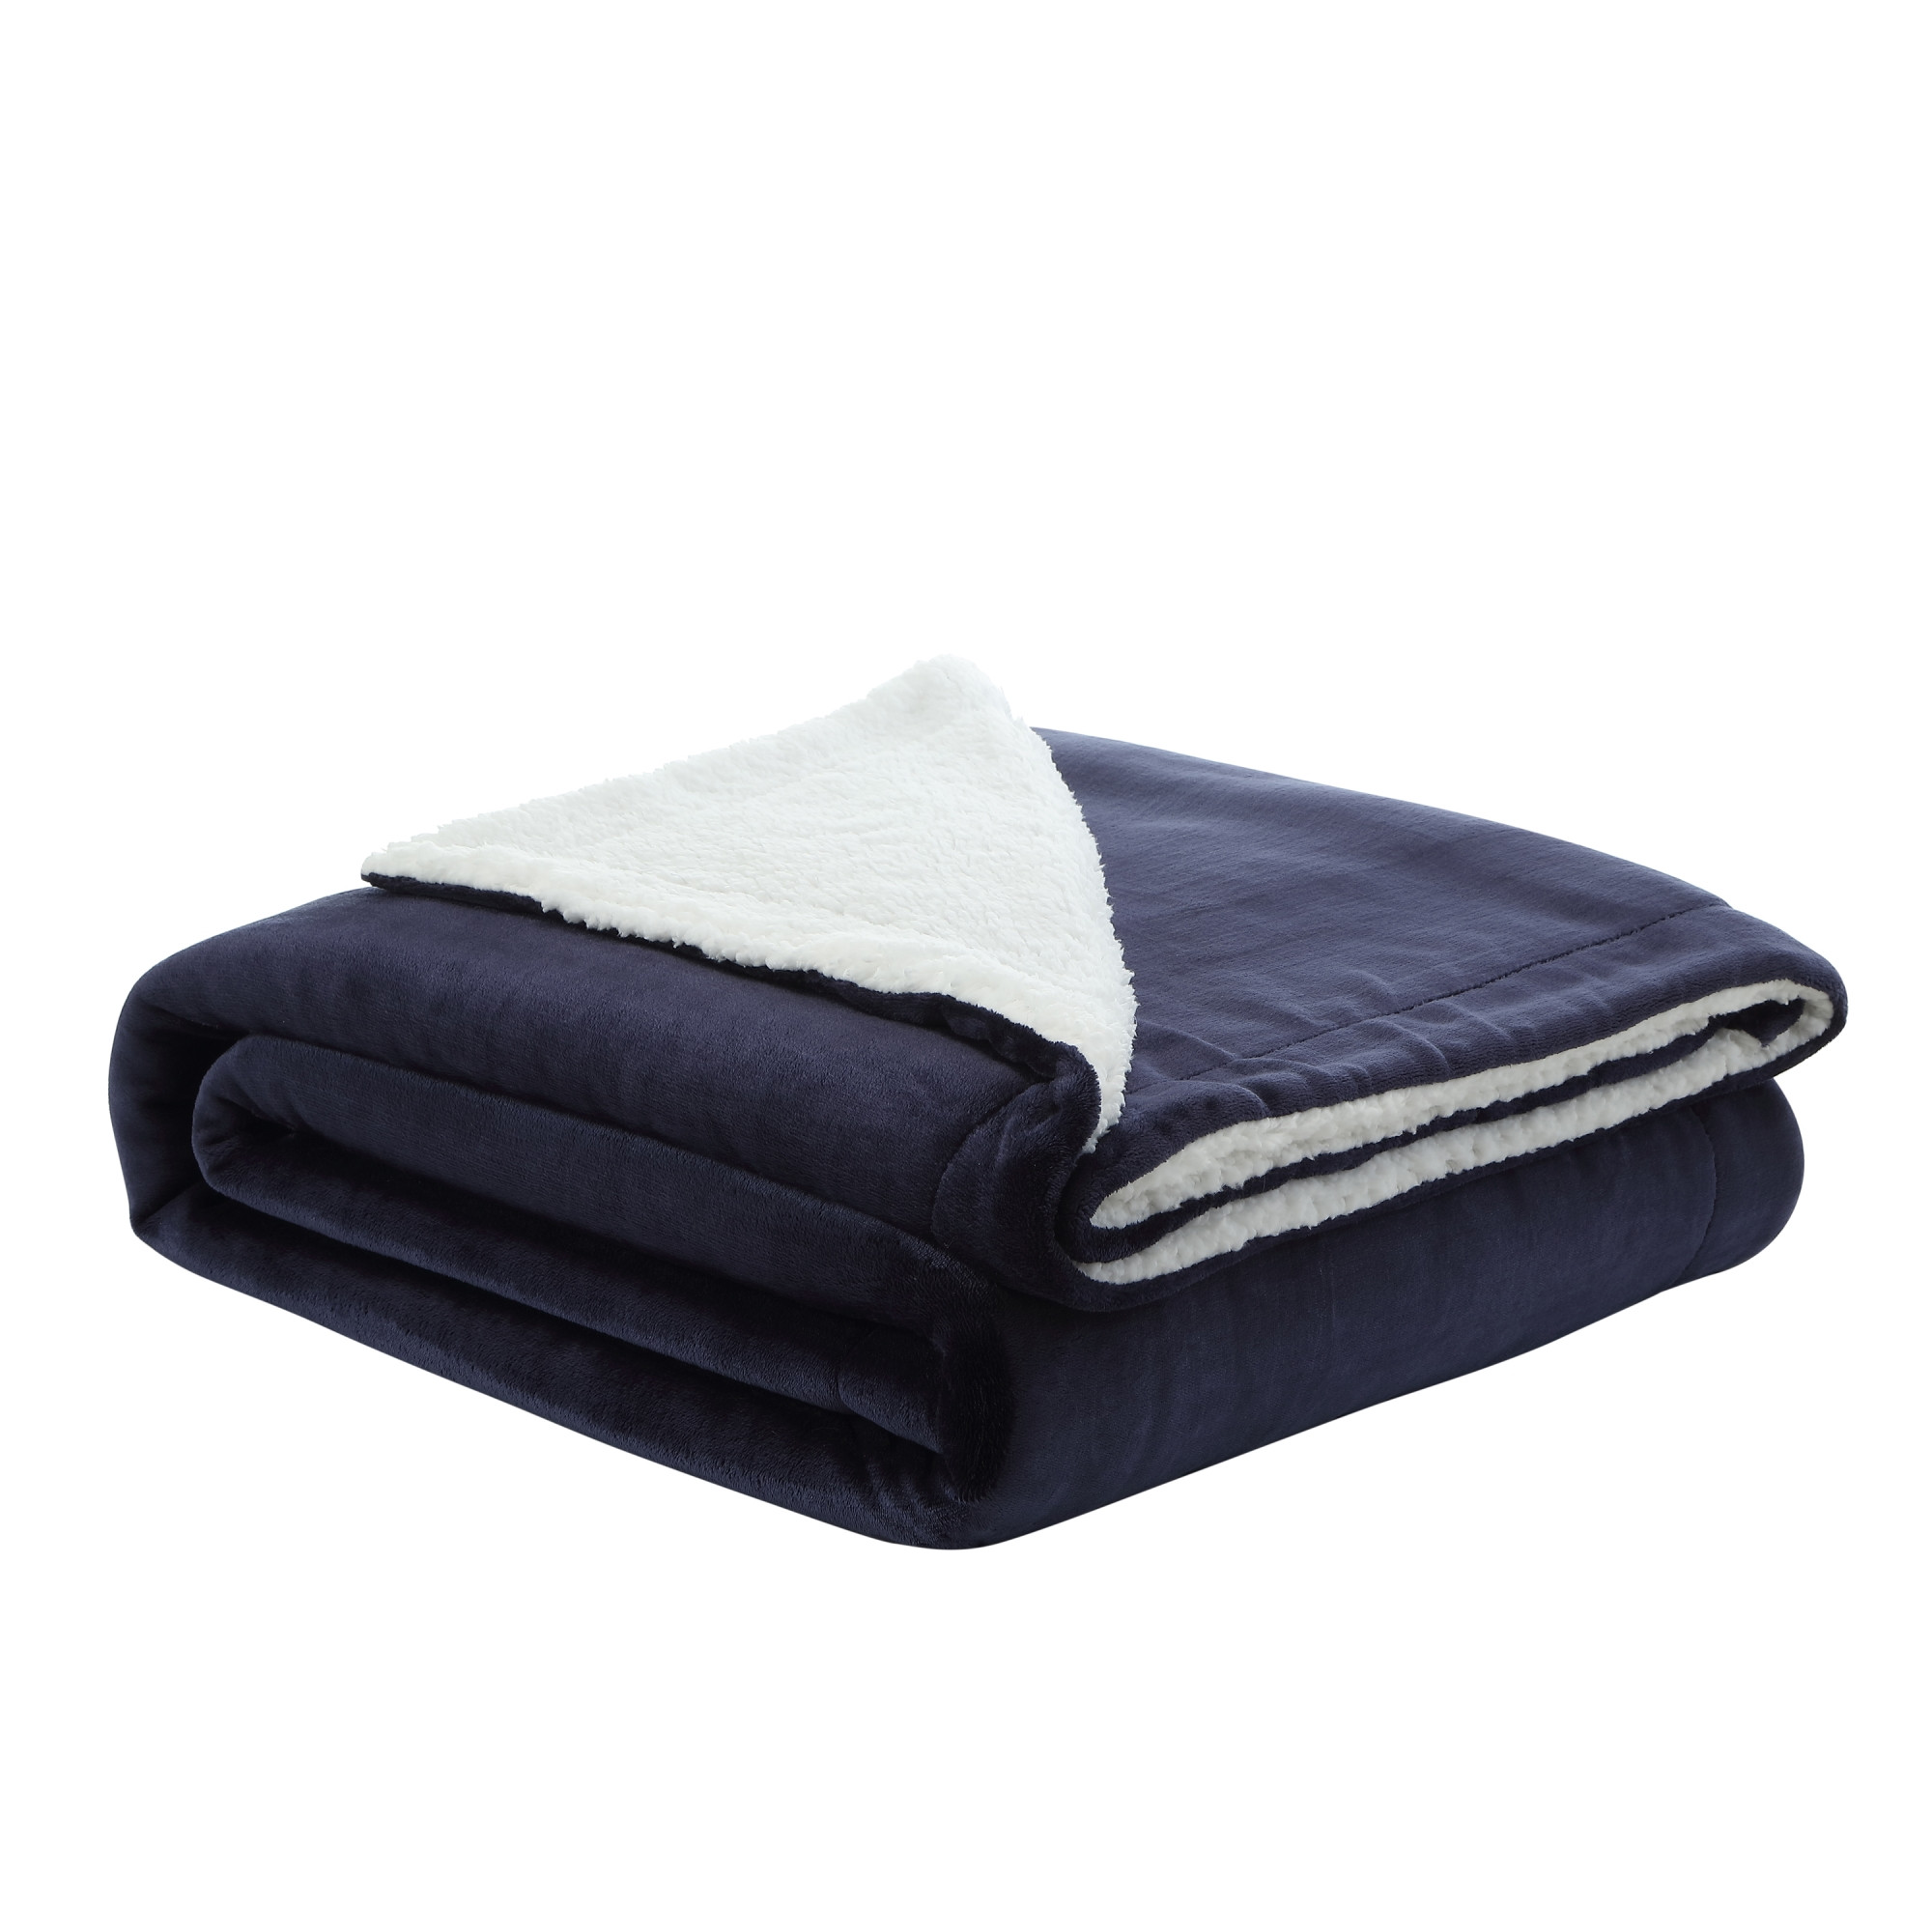 Navy Blue Knitted PolYester Solid Color Plush King Blanket-531217-1